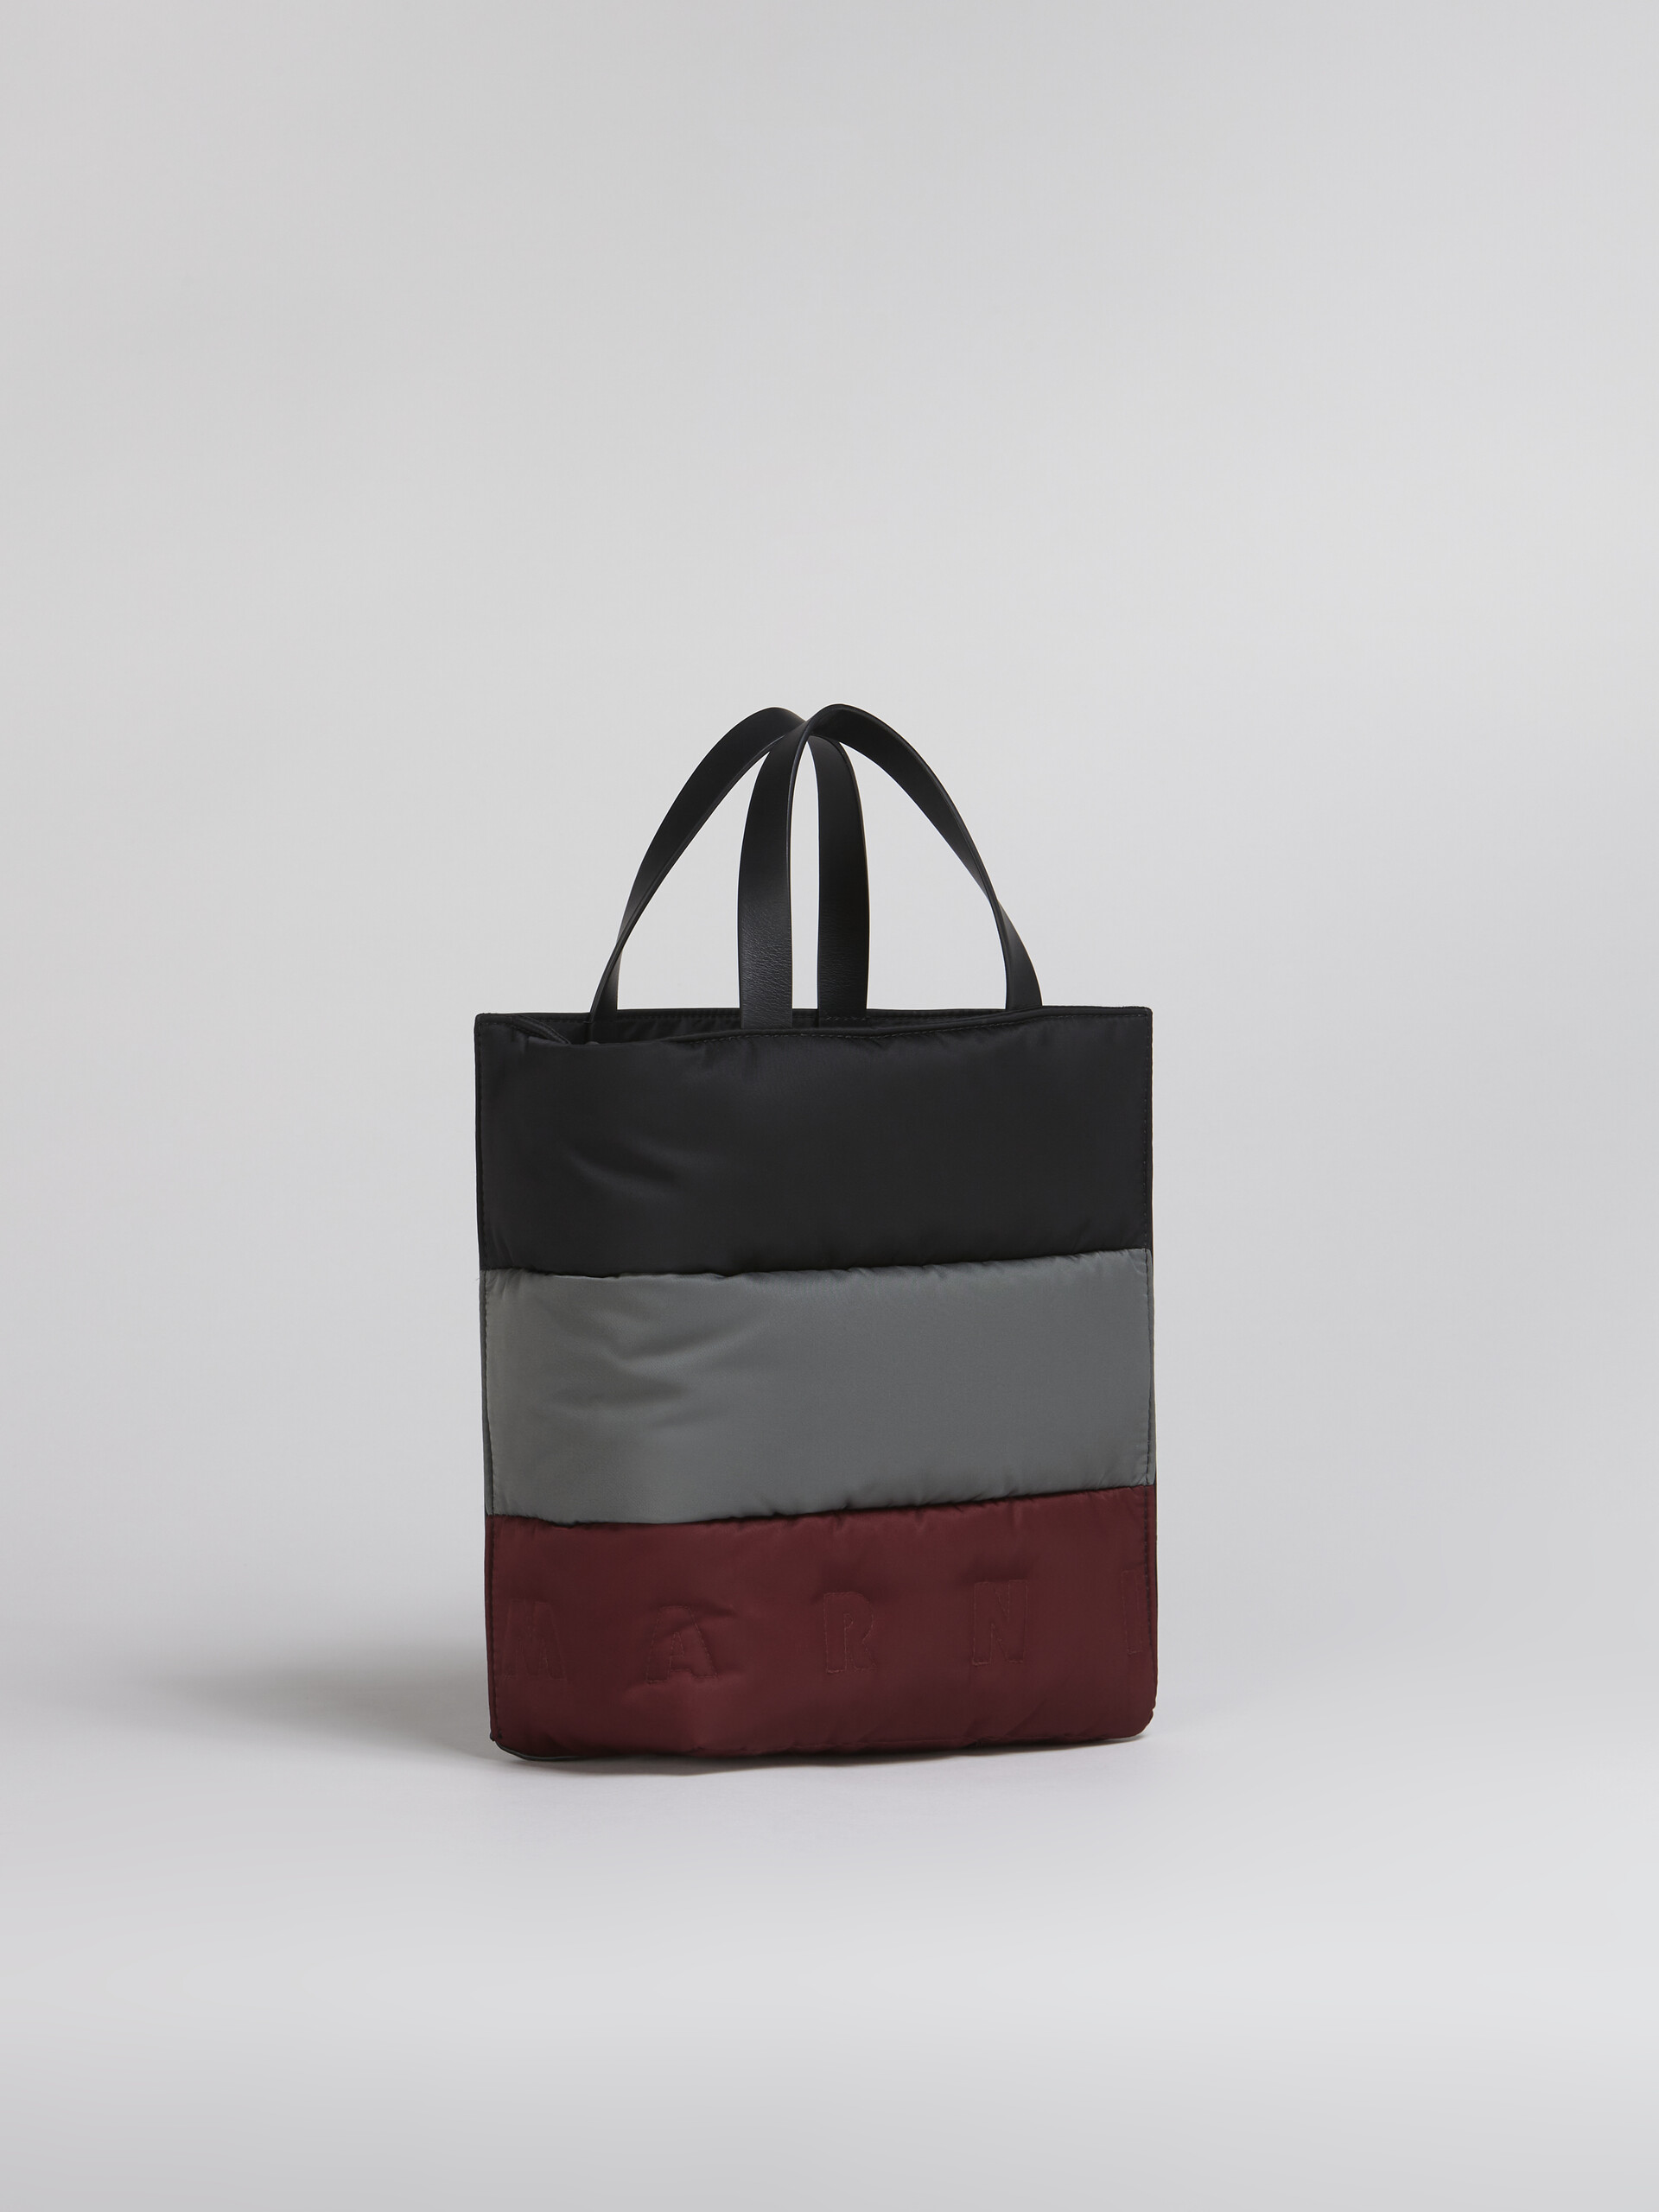 MUSEO SOFT small bag in tri-coloured nylon - Shopping Bags - Image 6